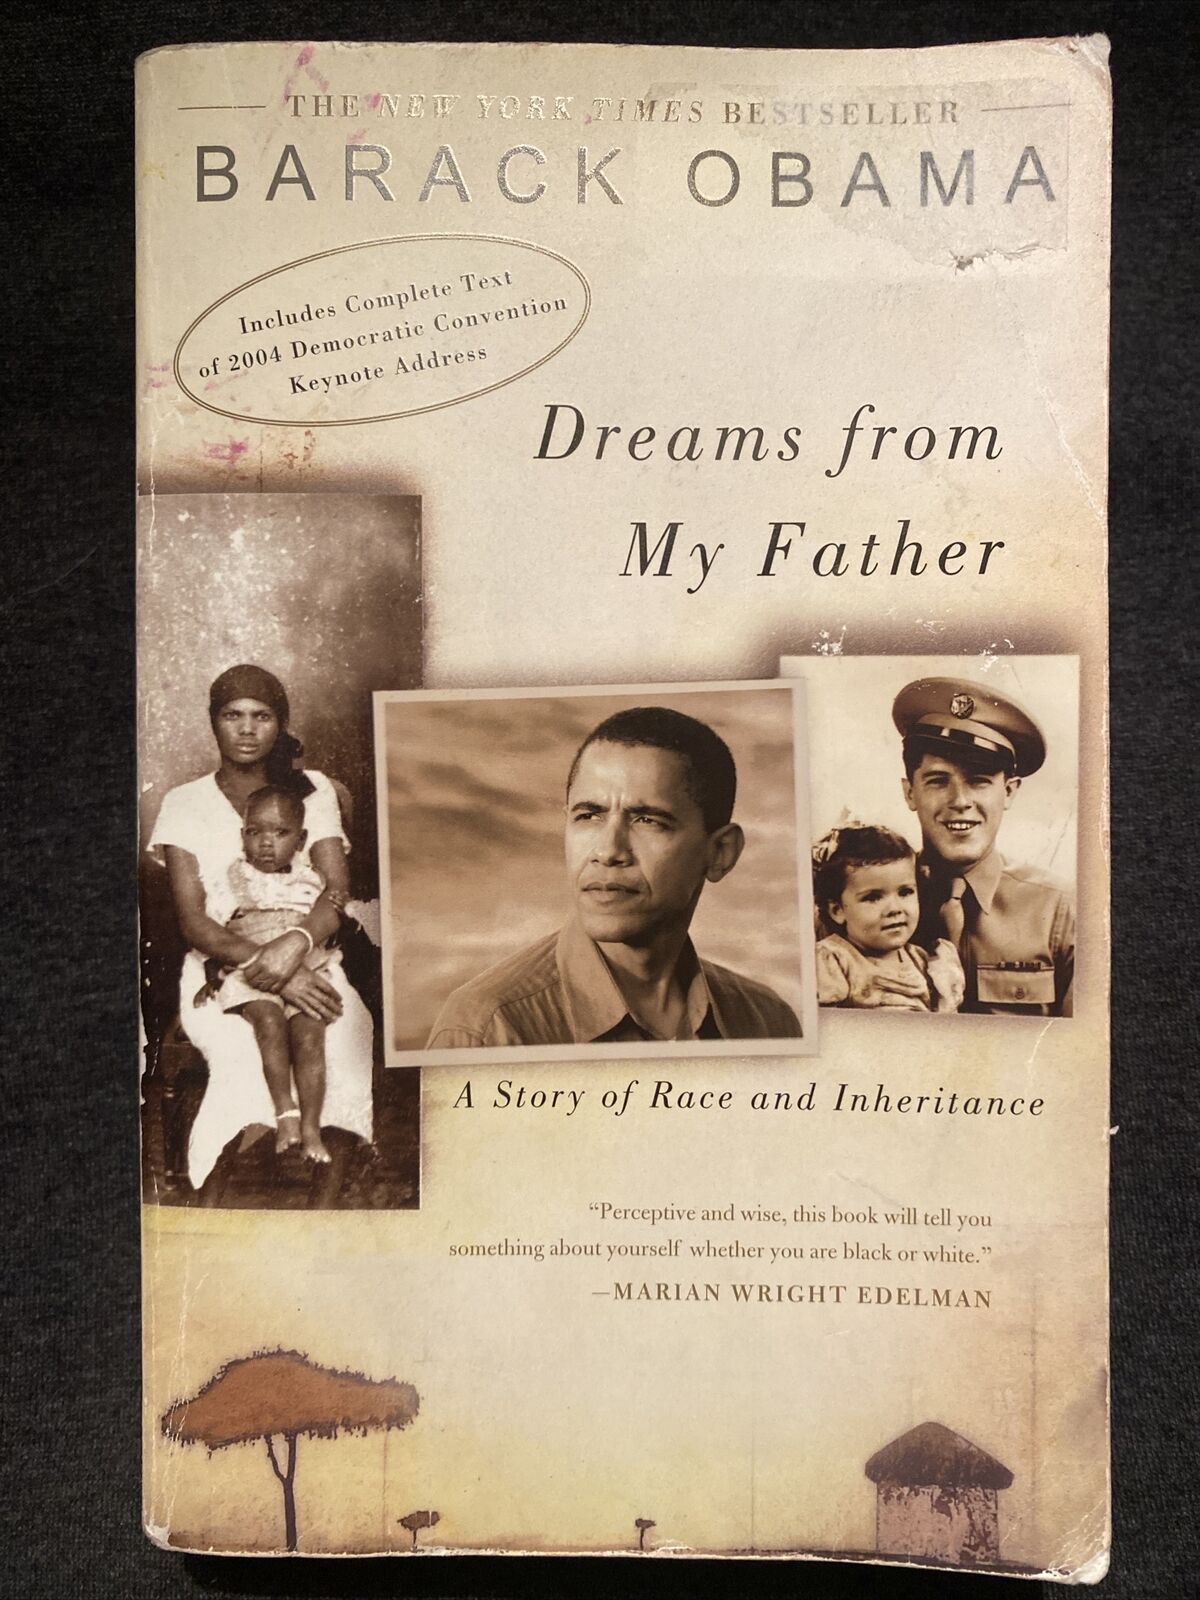 Barack Obama *SIGNED* Dreams From My Father Book - US President - AUTHENTIC